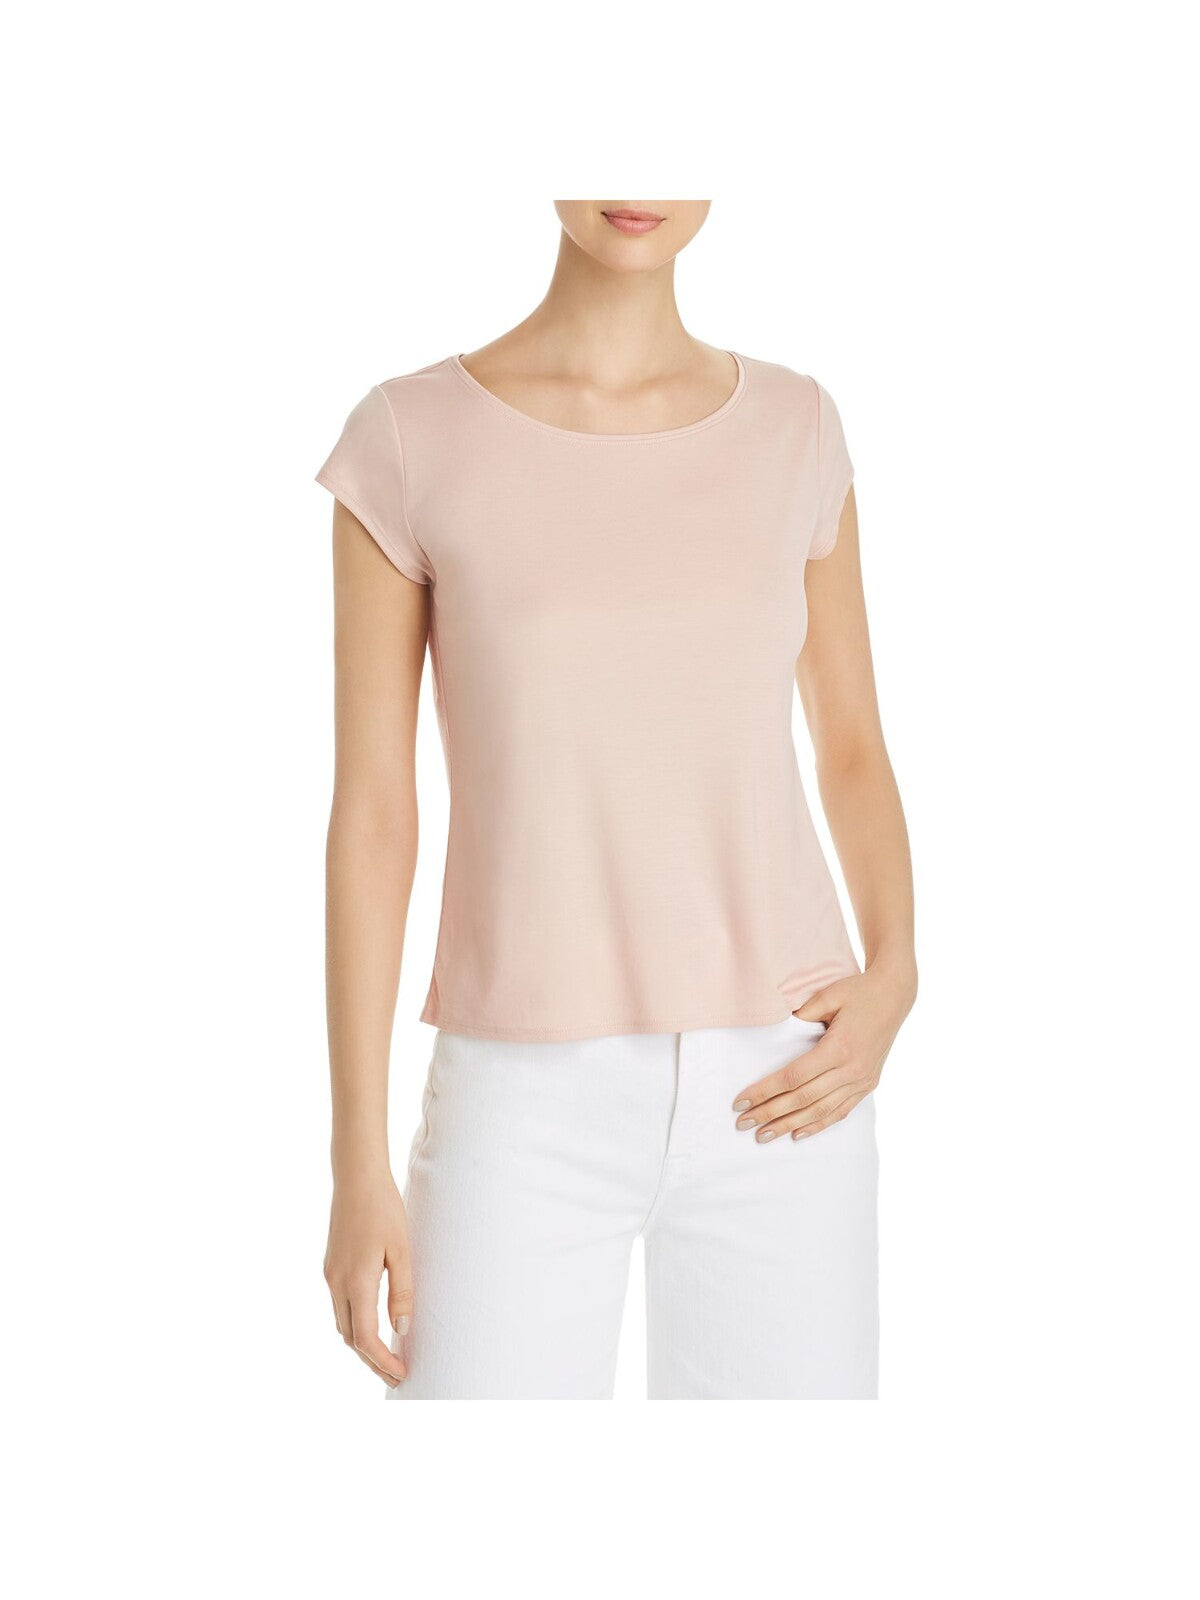 EILEEN FISHER Womens Pink Stretch Cap Sleeve Scoop Neck T-Shirt S